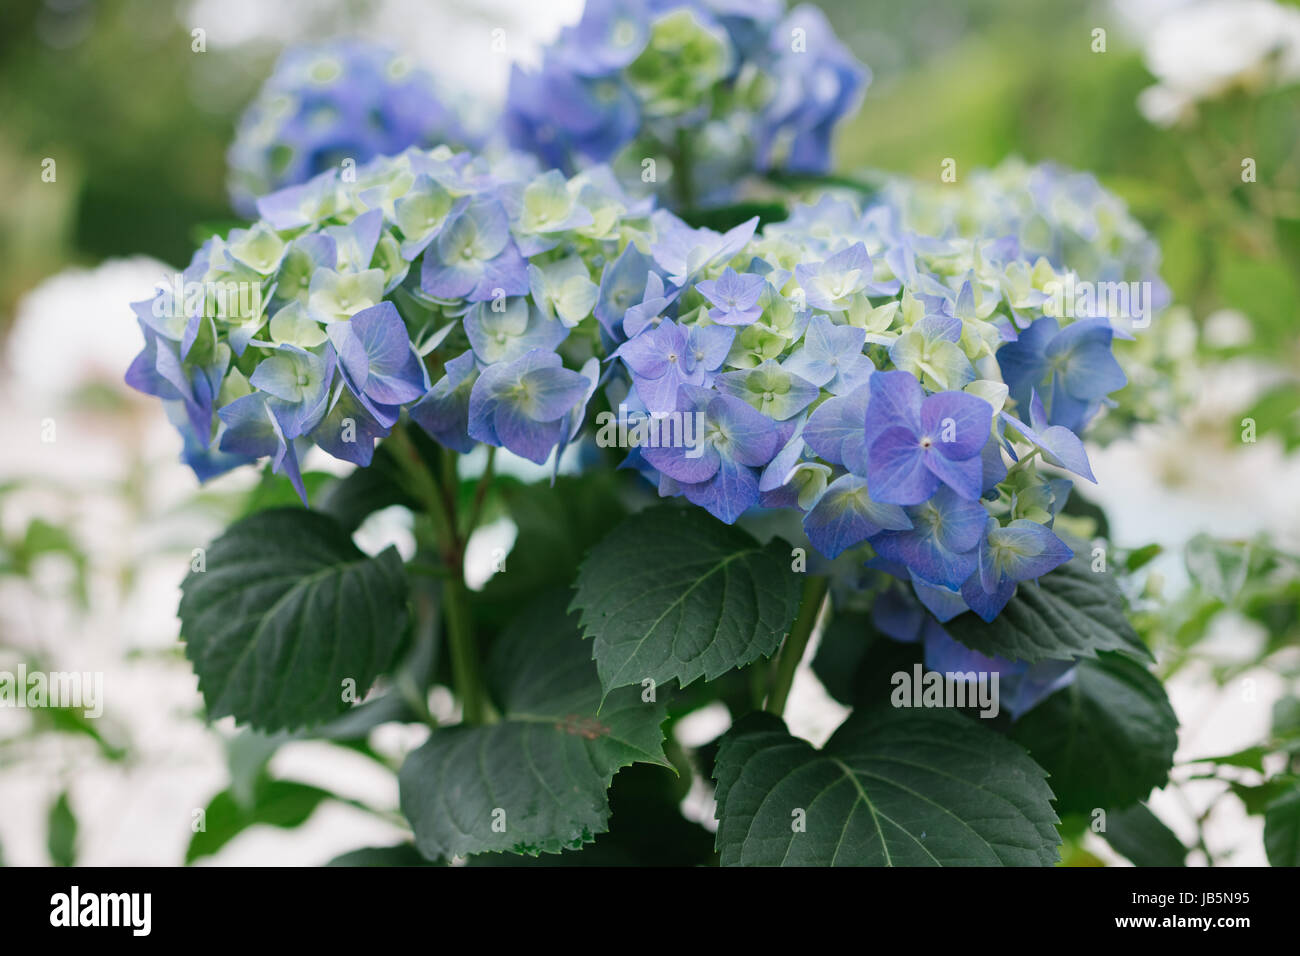 Blue and pink multicolored hortensia hydrangea flowering on a patio in the garden Stock Photo